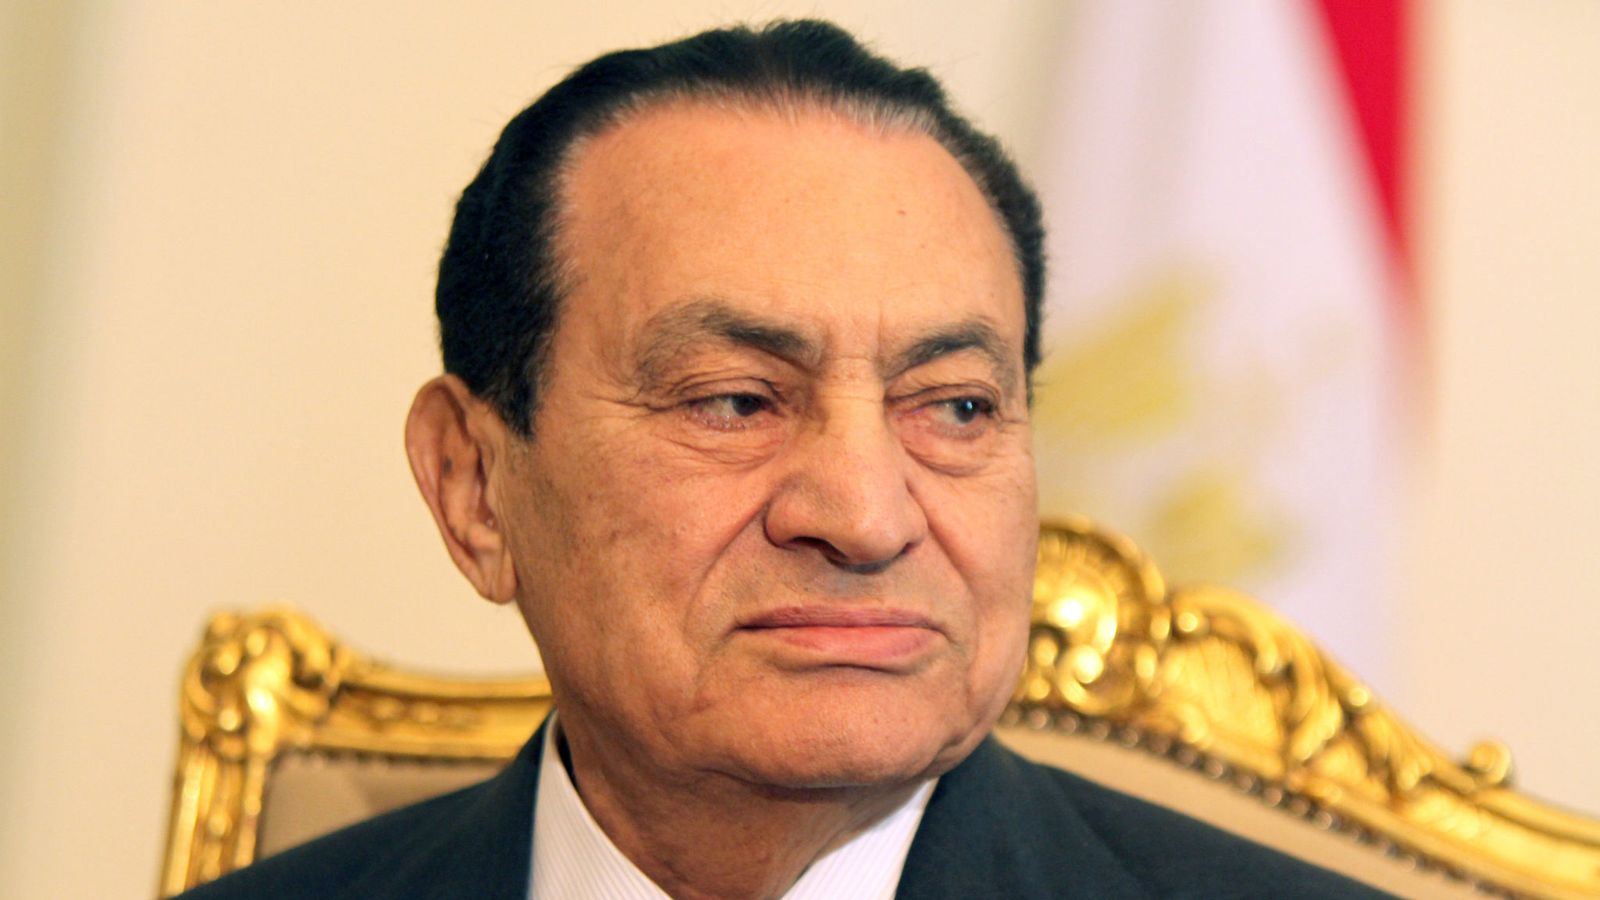 Hosni Mubarak, Egypts autocrat ousted by protests, dies at 91